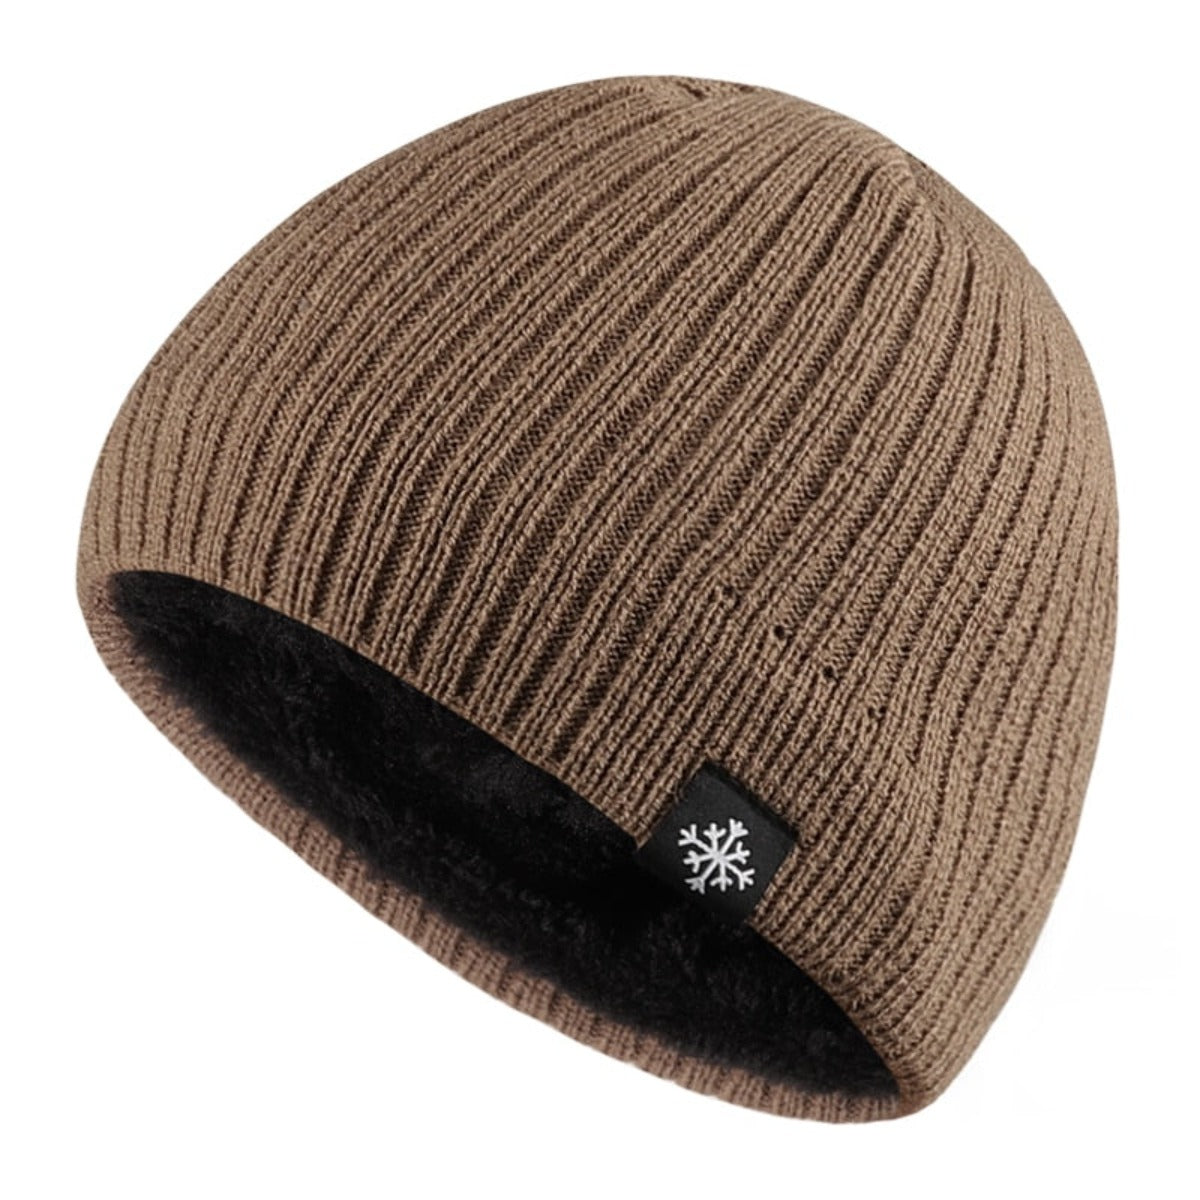 A breathable and anti-static knitted winter beanie hat in tan with a black logo.